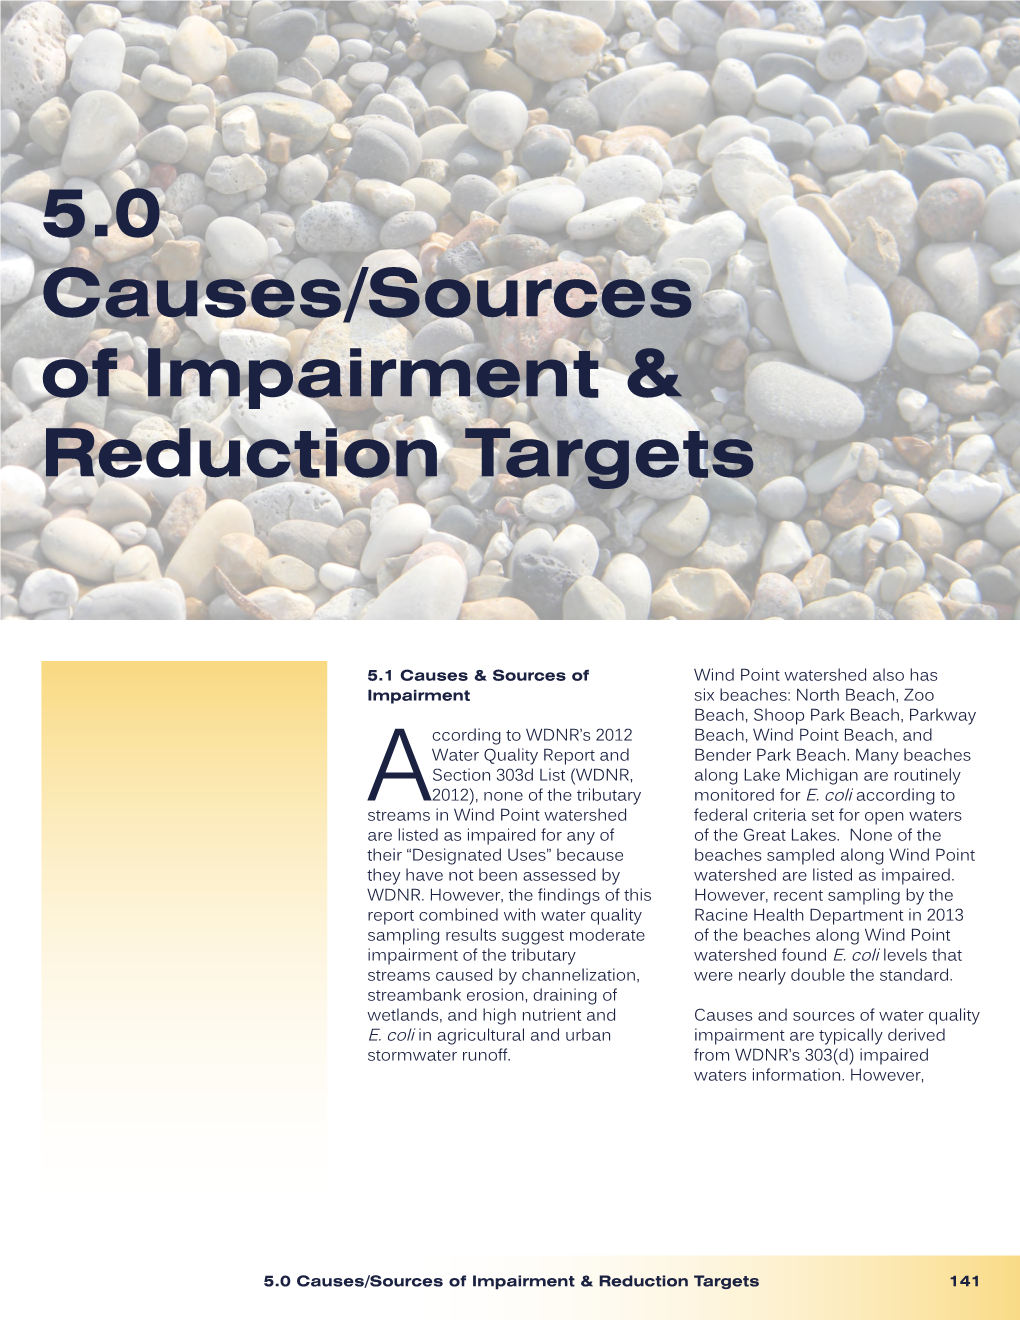 5.0 Causes/Sources of Impairment & Reduction Targets